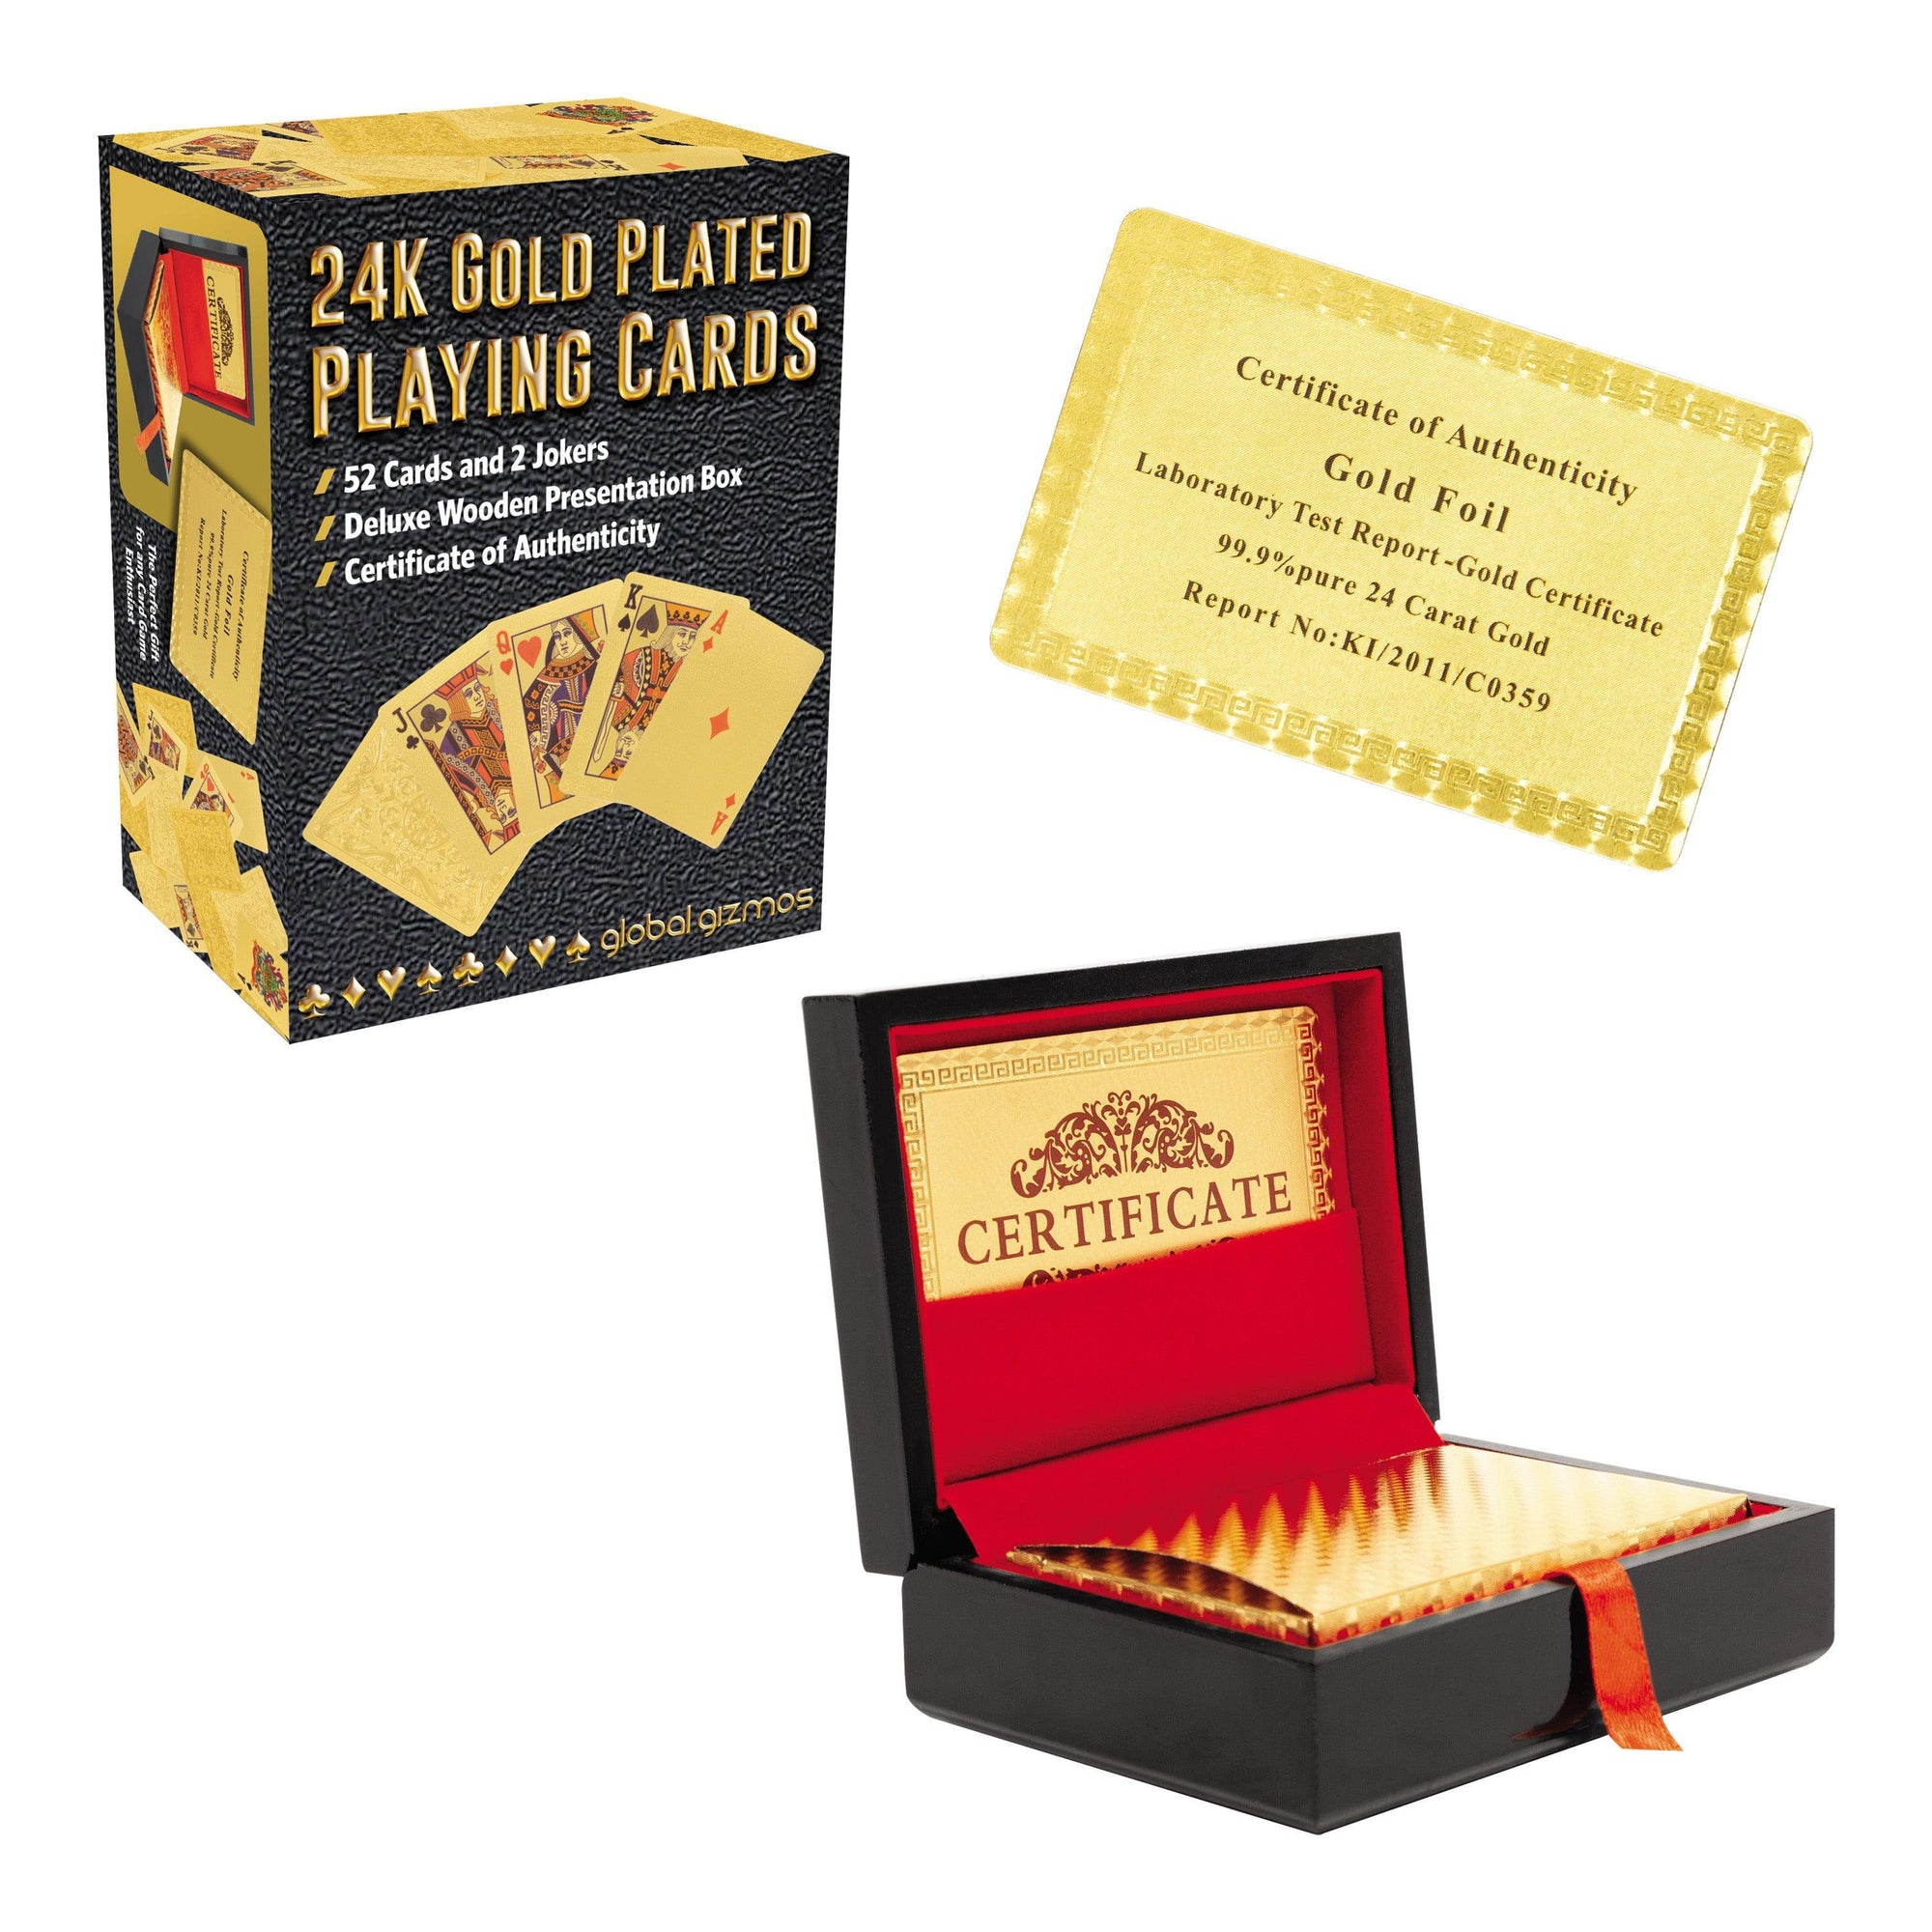 Global Gizmos Gold Plated Playing Cards With Box - Choice Stores